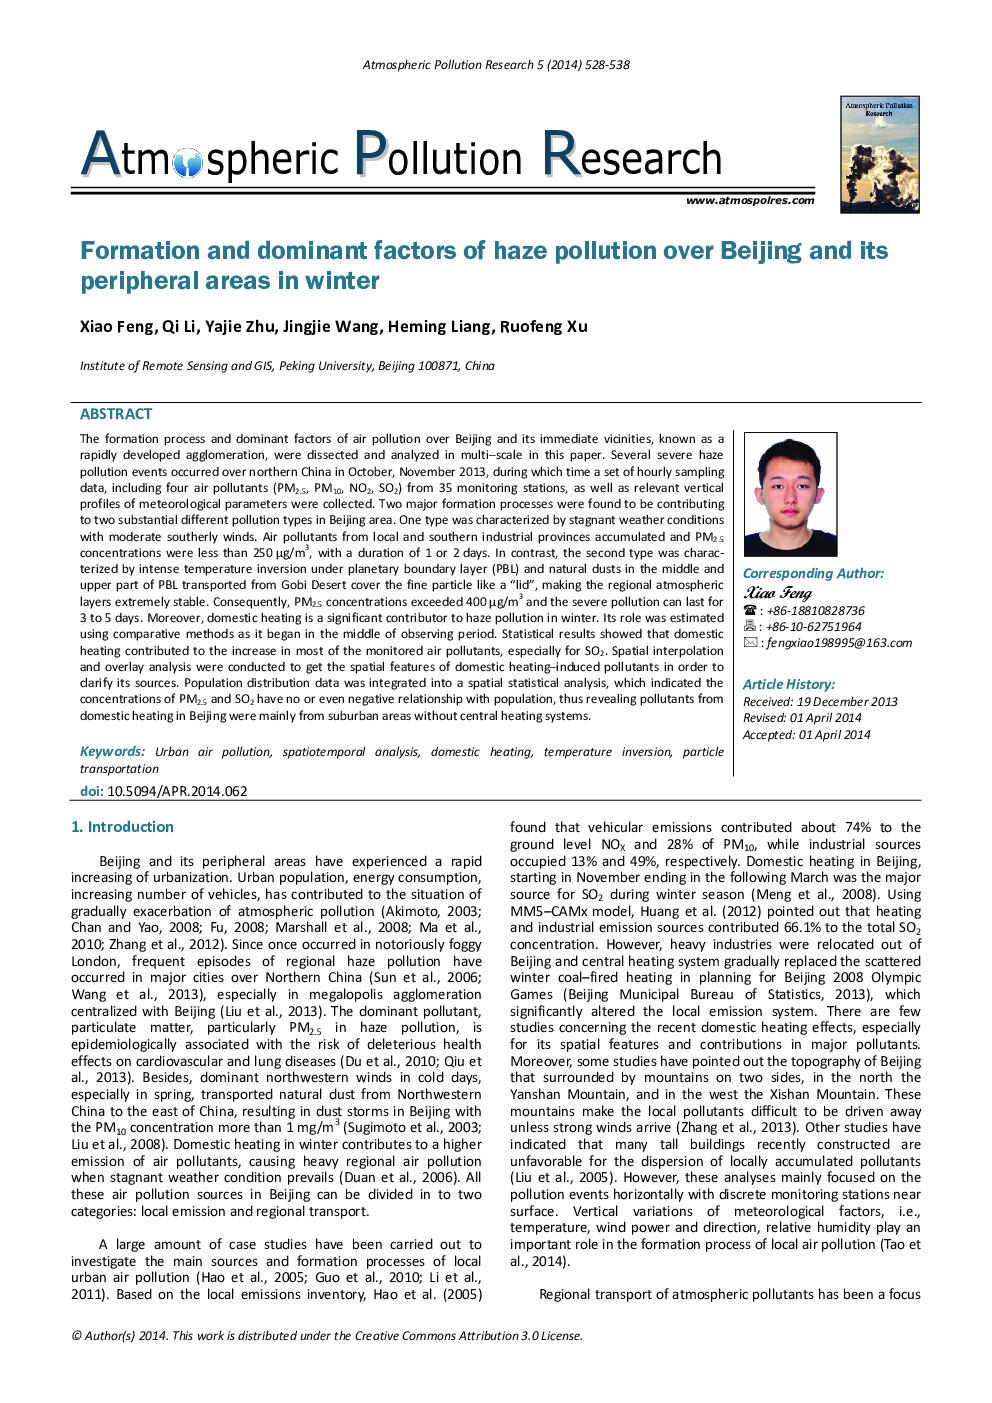 Formation and dominant factors of haze pollution over Beijing and its peripheral areas in winter